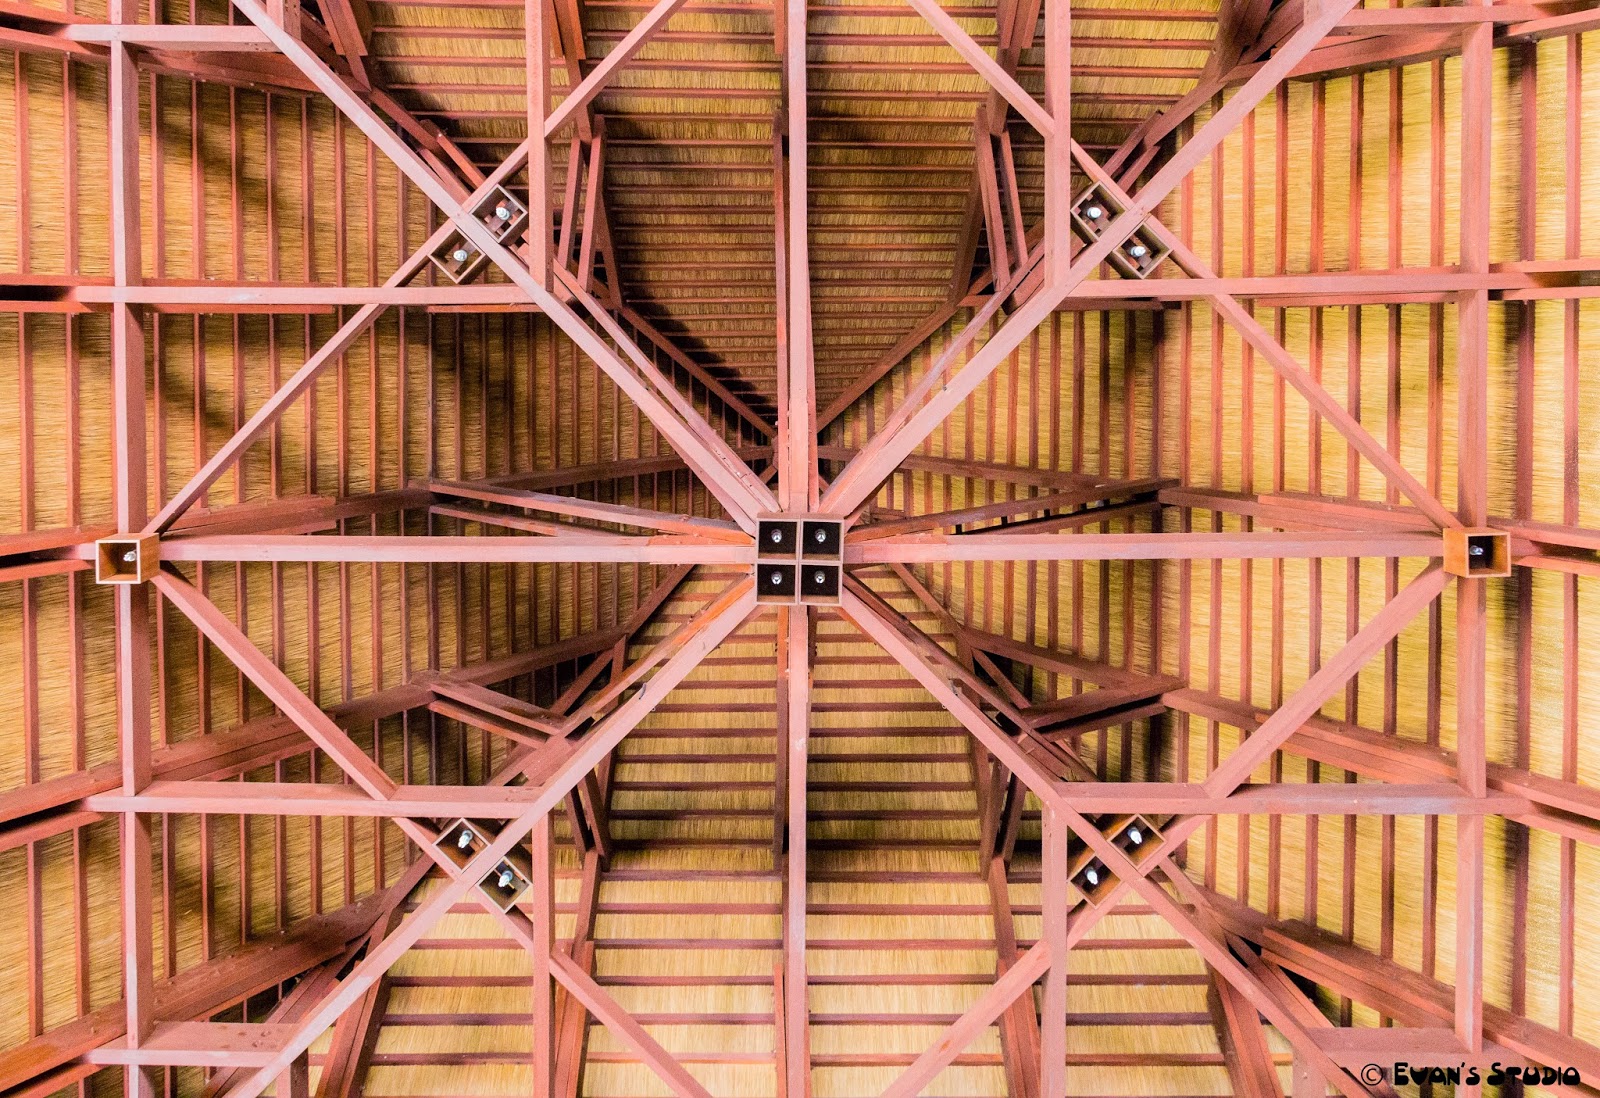  An image showing the interesting symmetrical patterns of the ceiling of Apulit Island Resort's dining hut.